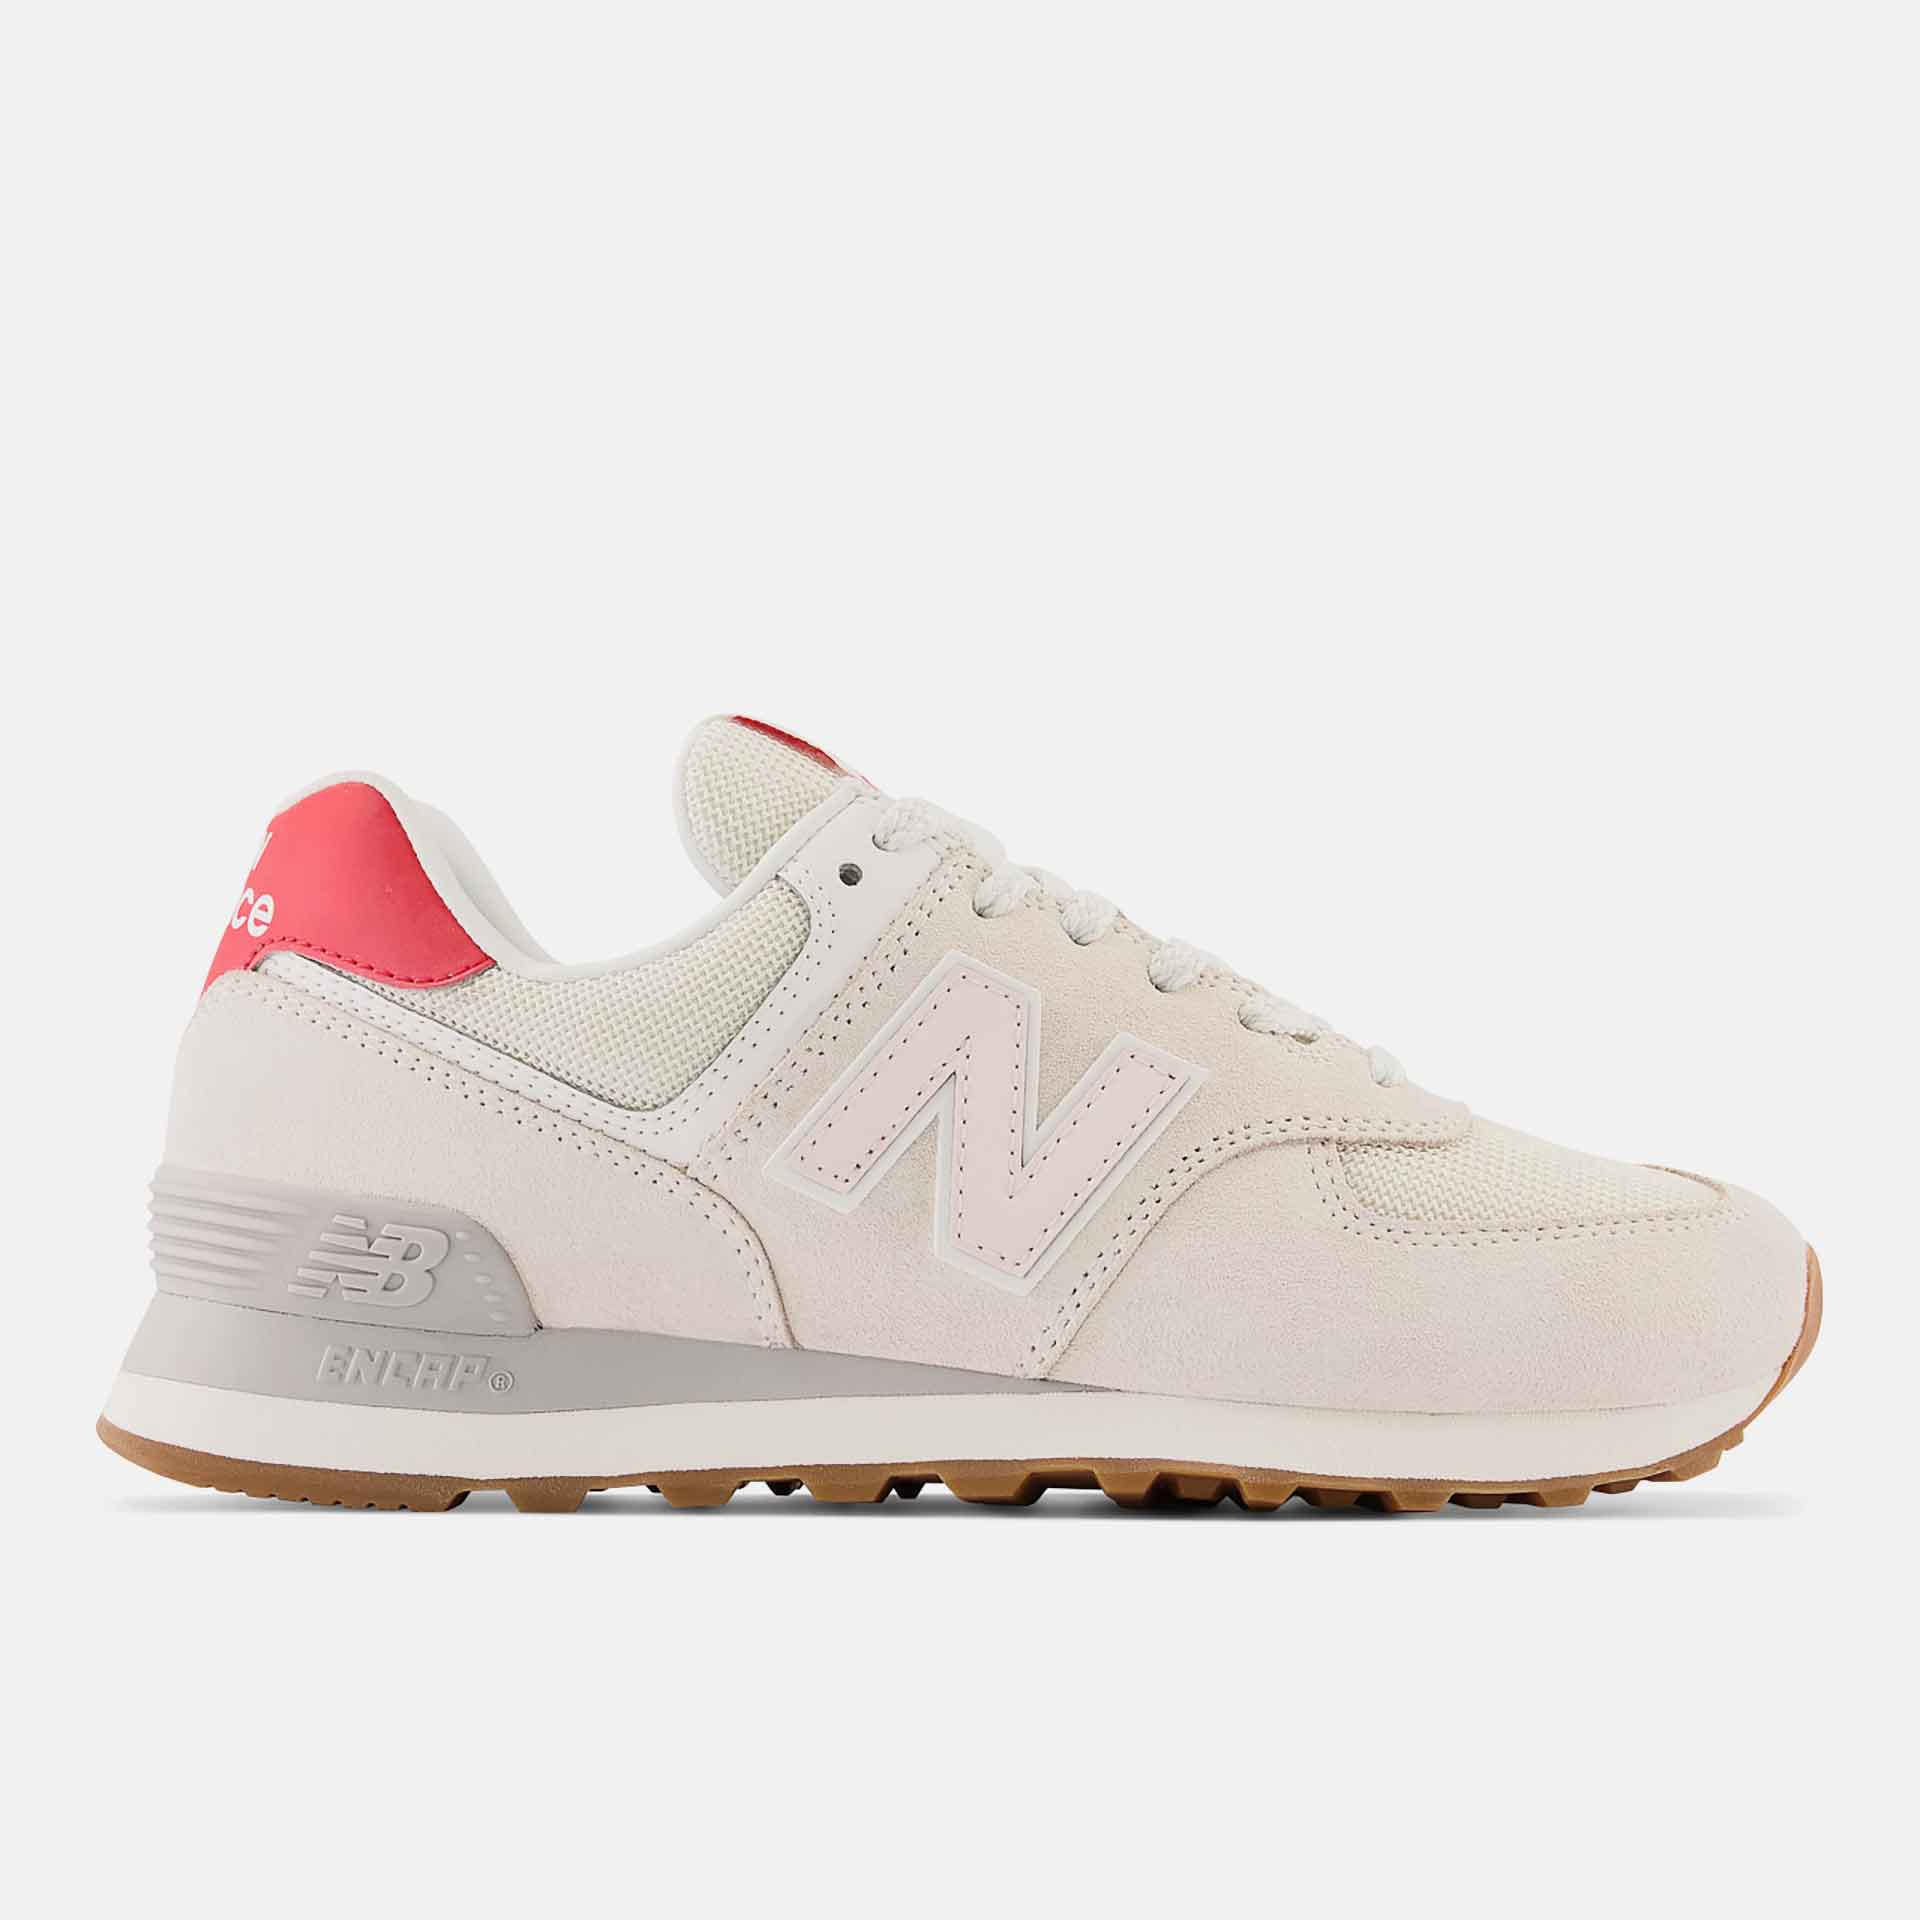 New Balance WL574RC Sneaker Reflection/Washed Pink